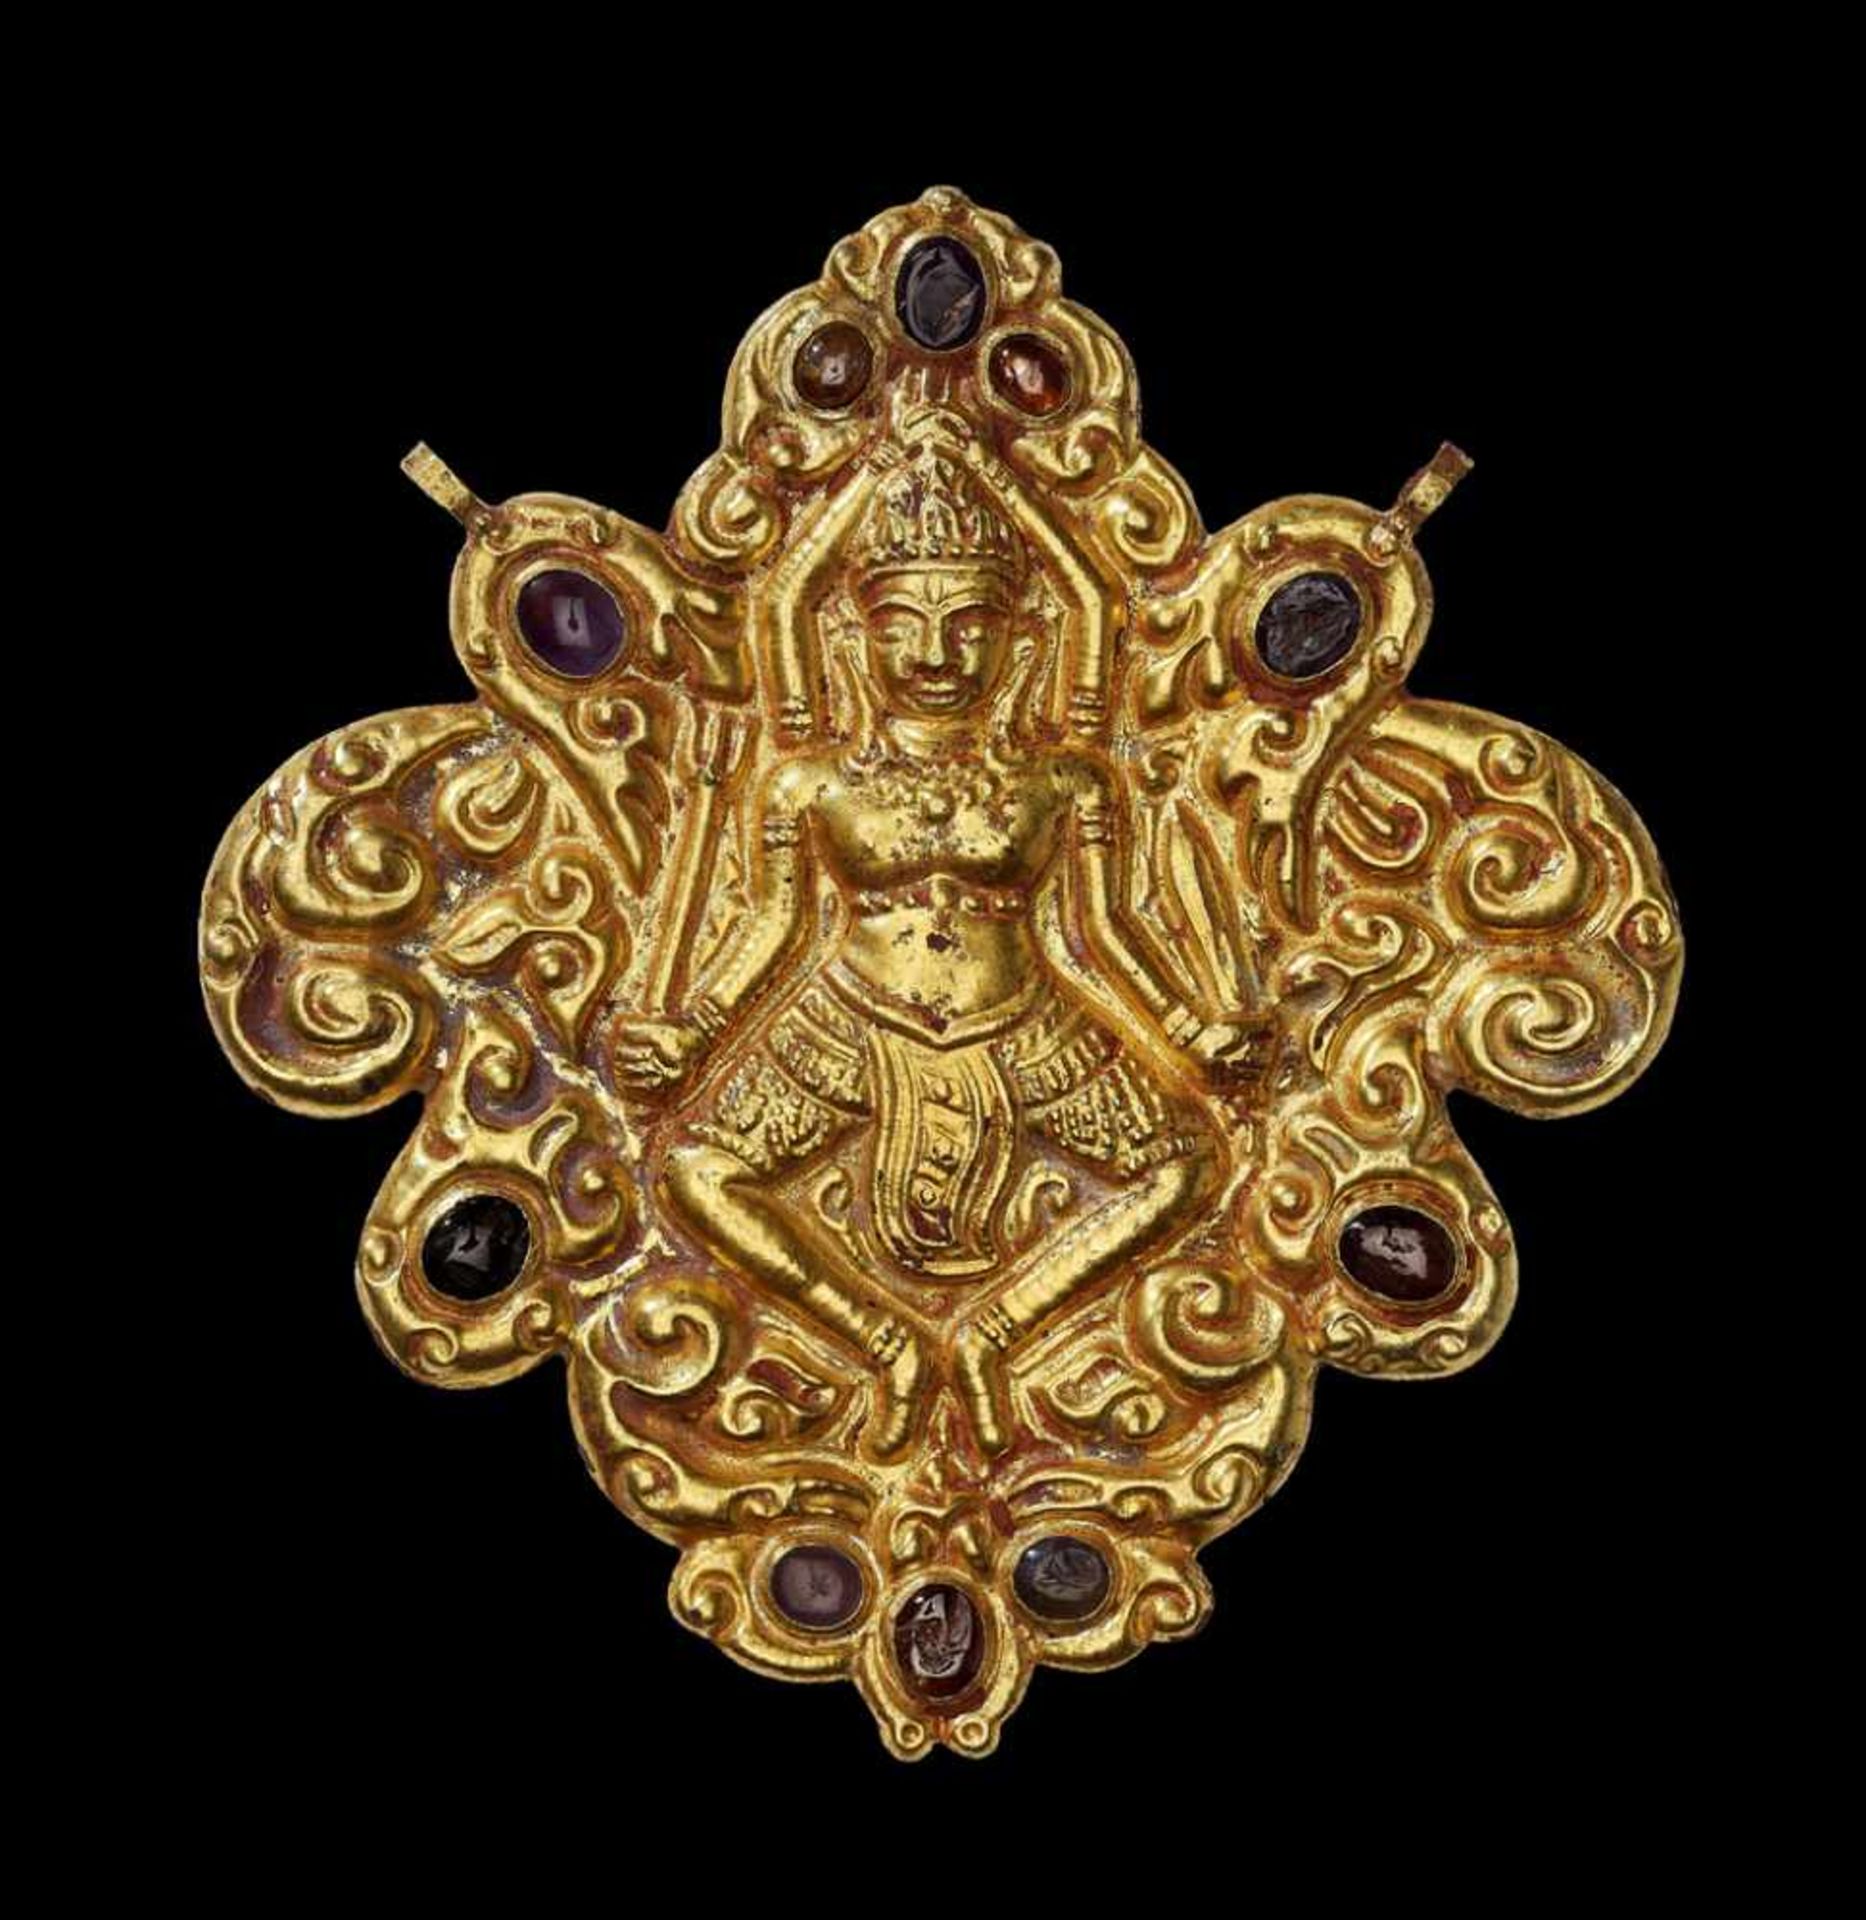 A CHAM REPOUSSÉ GOLD PECTORAL DEPICTING SHIVA DANCING Central Cham kingdom, most probably Vijaya, - Image 3 of 4